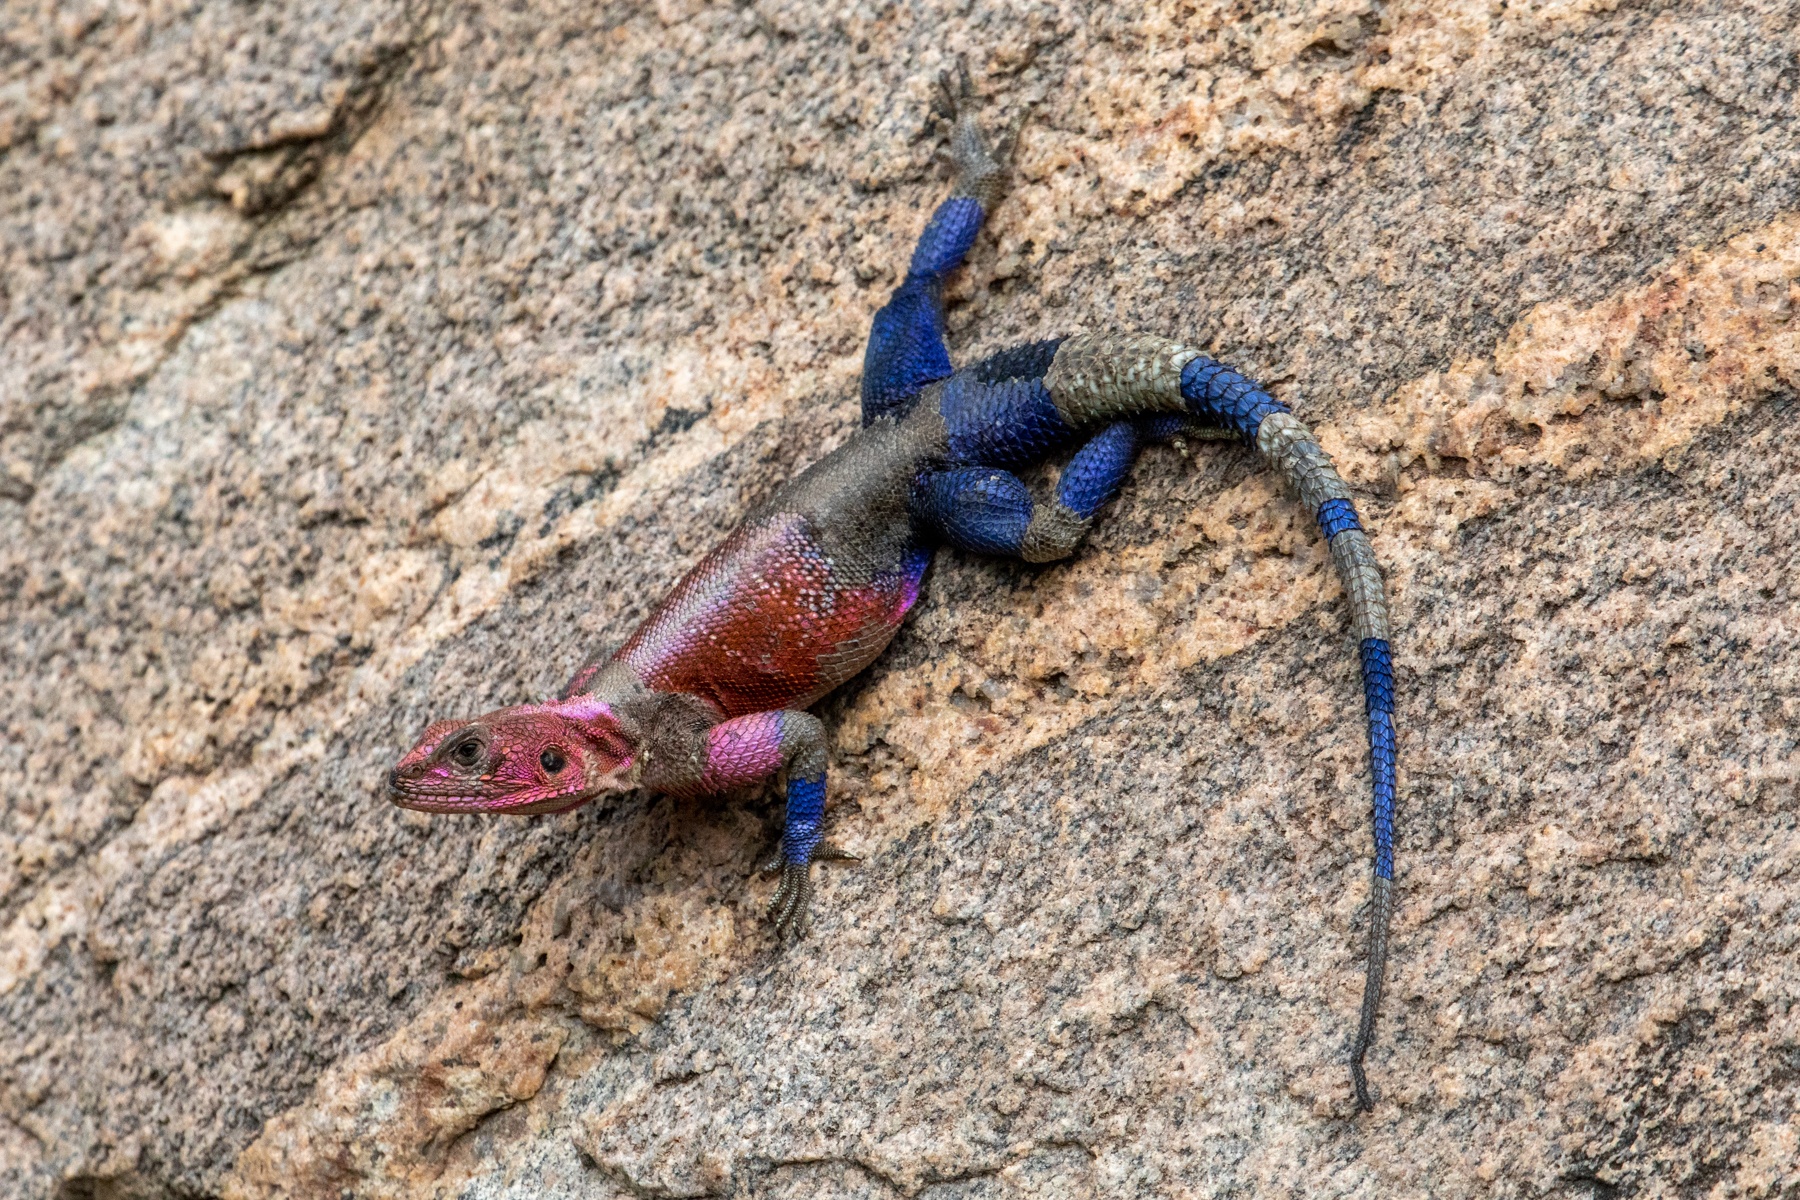 'Tis the season for Rock Agamas to be breeding. Brightly coloured males can be found chasing around duller coloured females during our tour